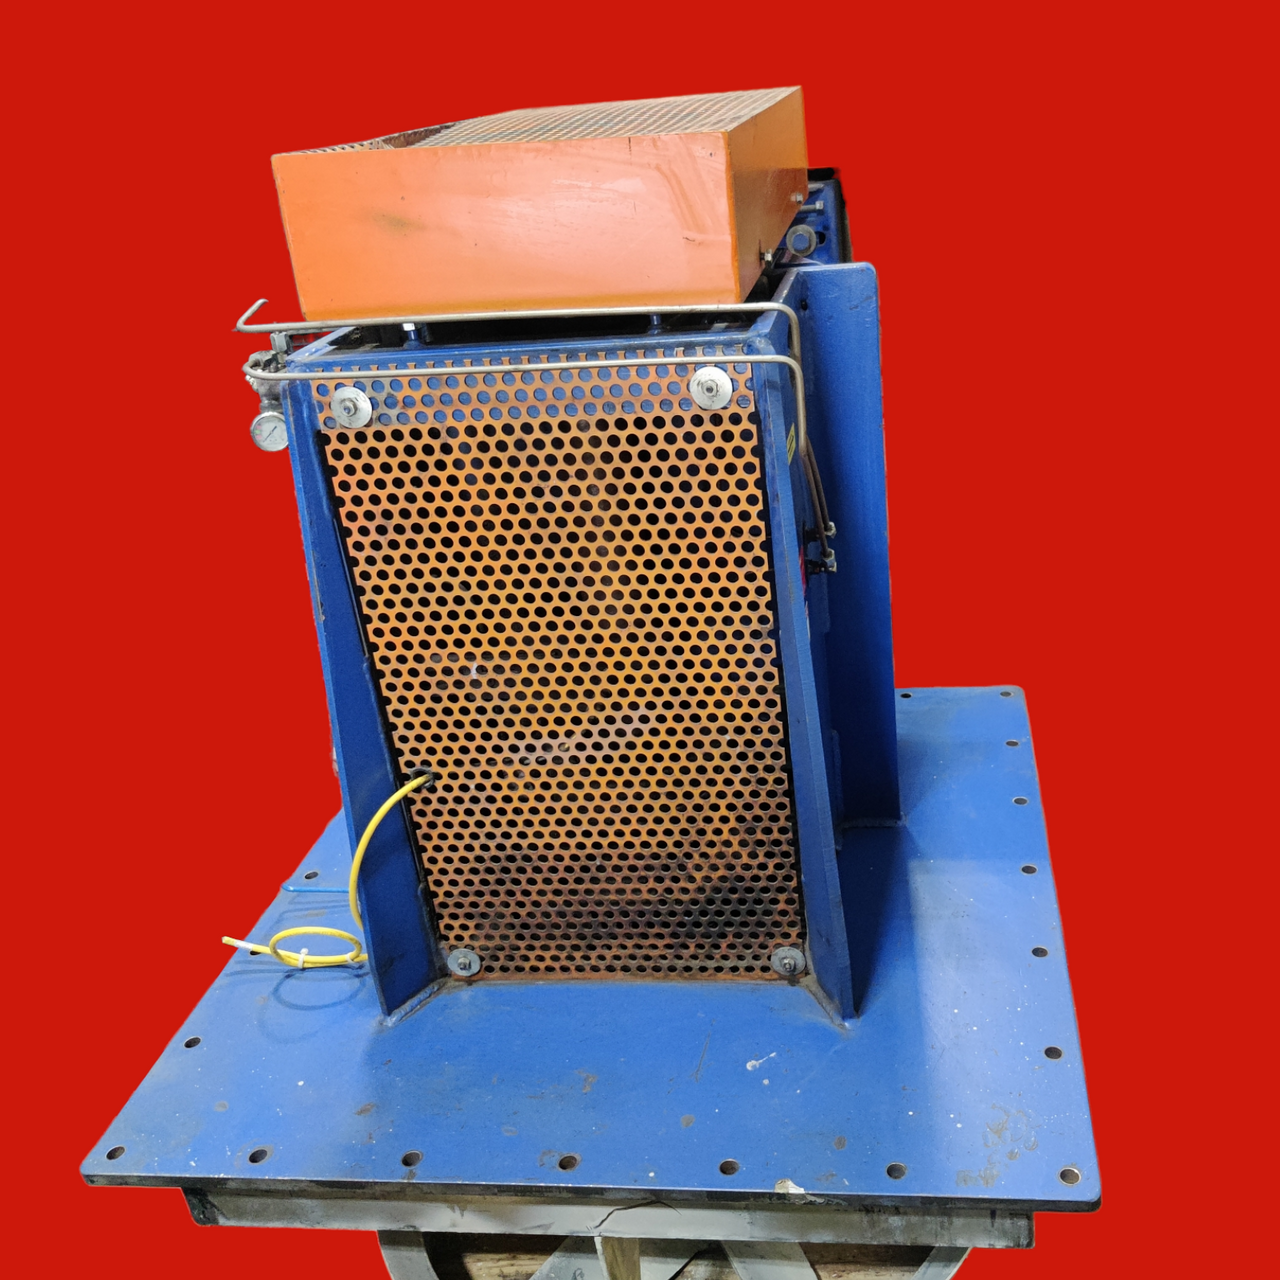 IGE "Thermo" High Temperature Axial Flow Fan, FP-29-L Powered by Baldor EM3774T Motor